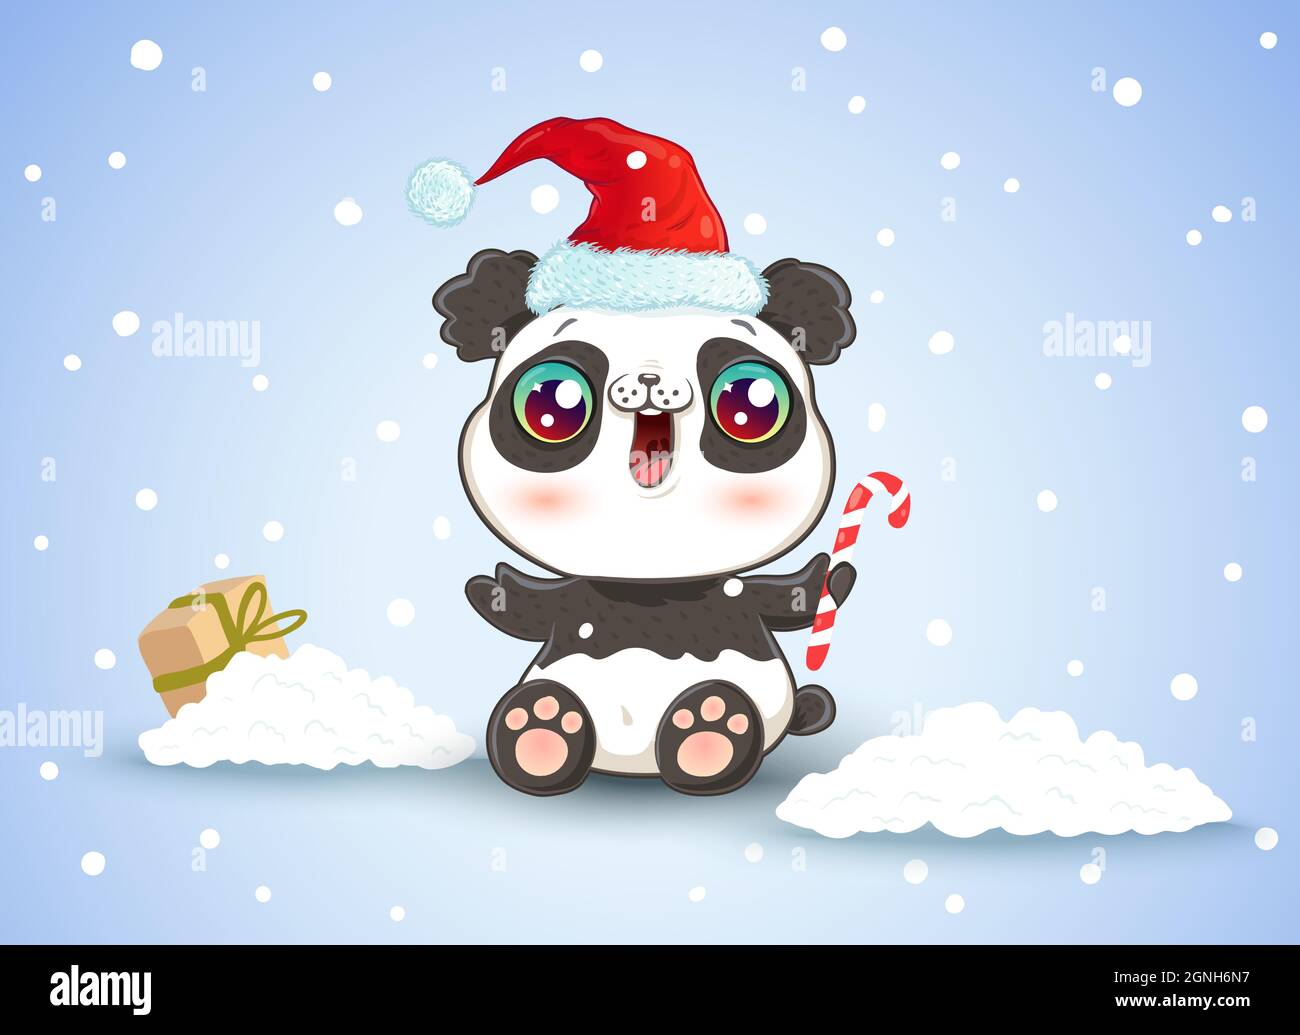 Vector illustration of a cute panda in Santa hat. Panda on snow in kawaii style for Christmas Stock Vector